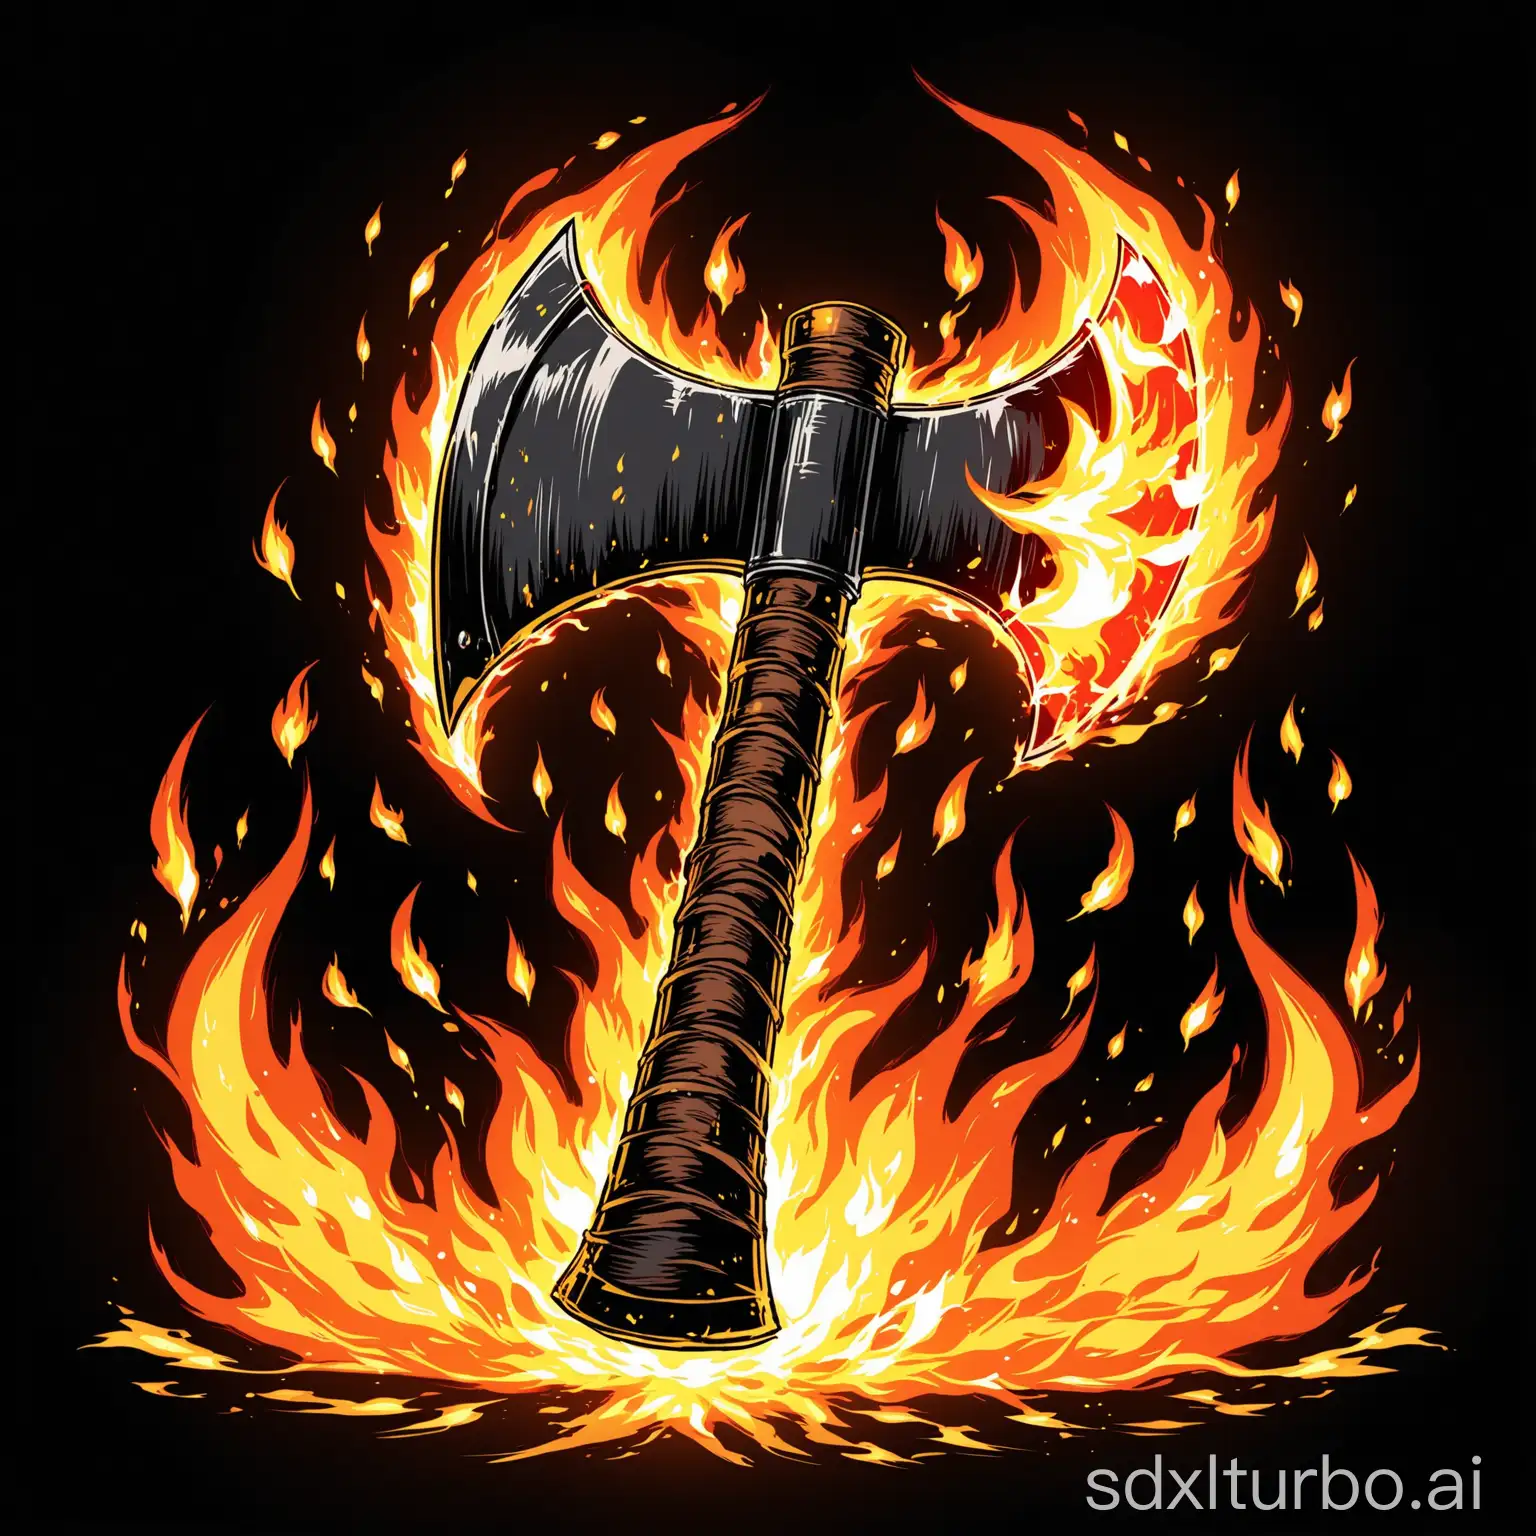 A flaming double-sided axe on a uniform black background